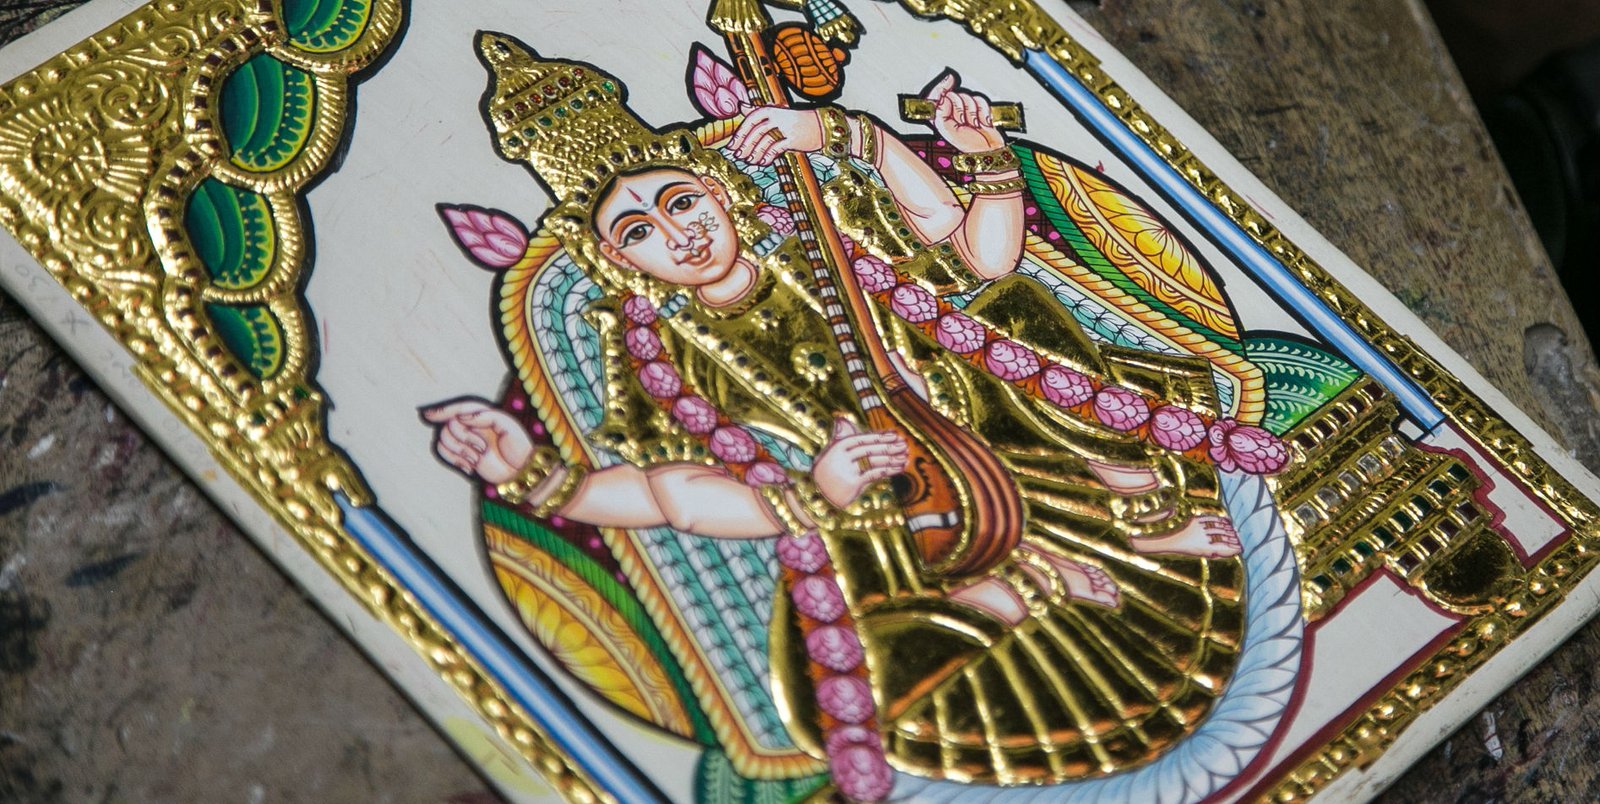 Discovering The Art Of Tanjore Paintings In Southern India